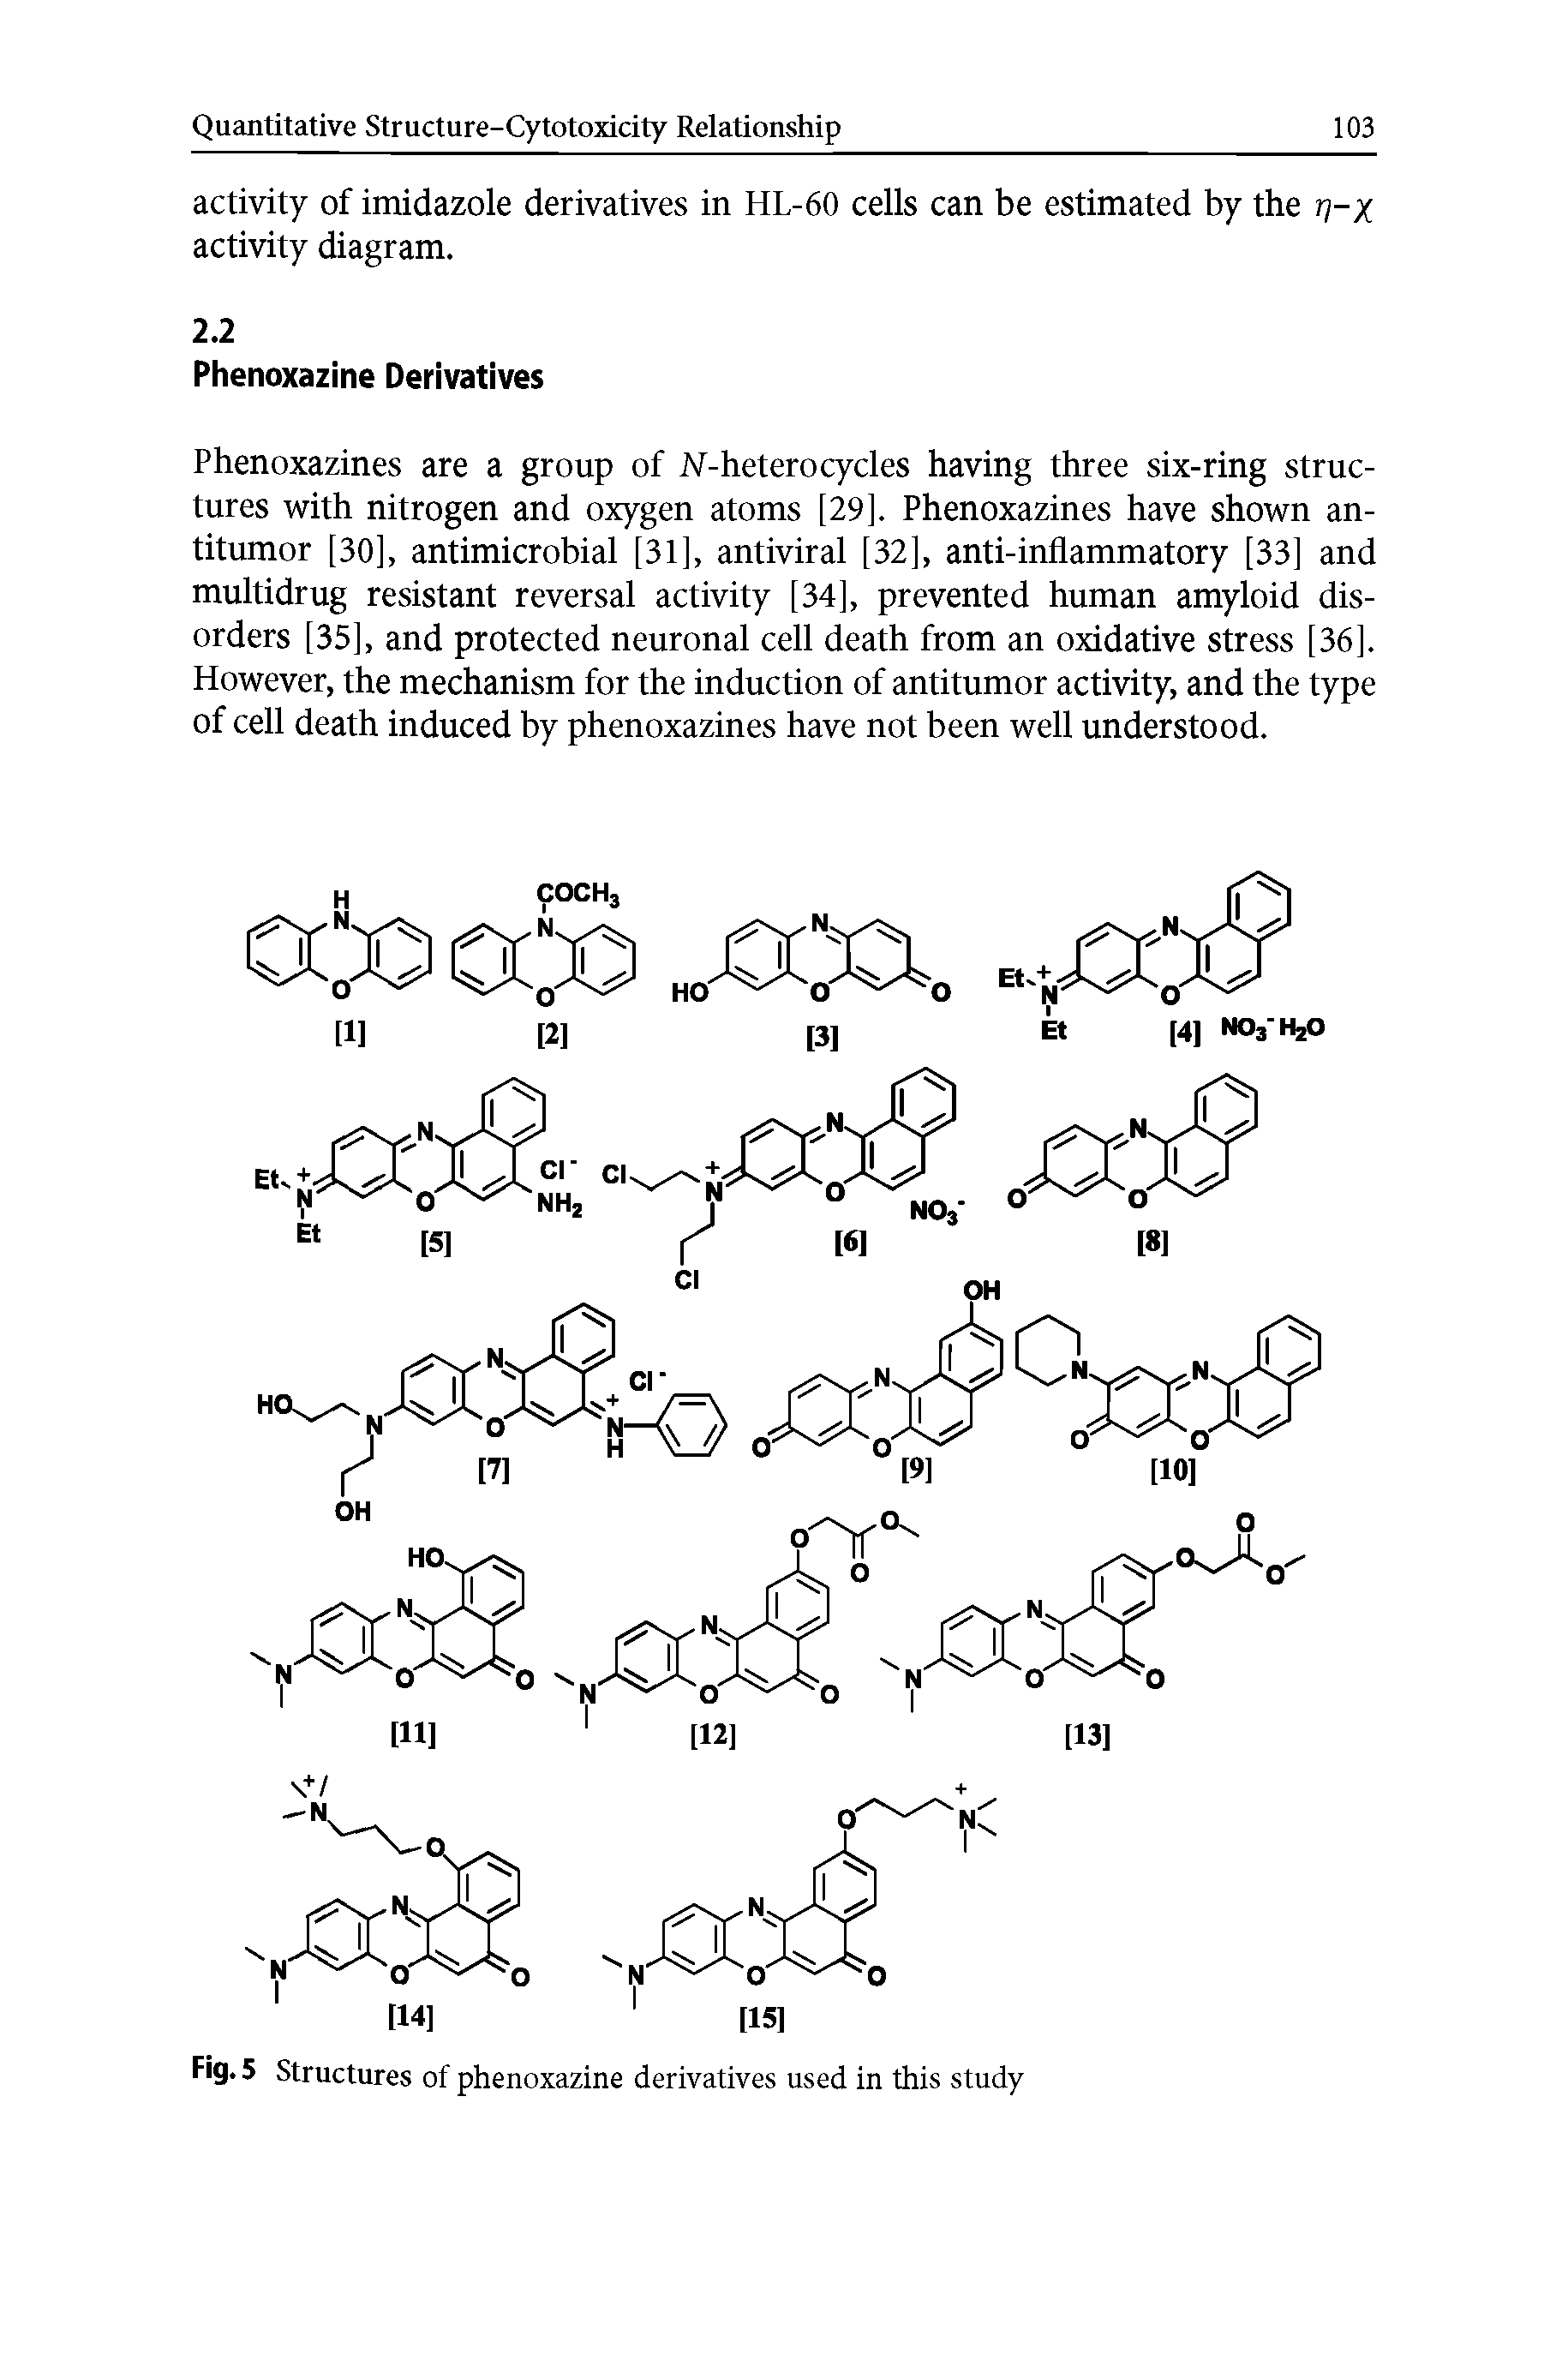 Fig. 5 Structures of phenoxazine derivatives used in this study...